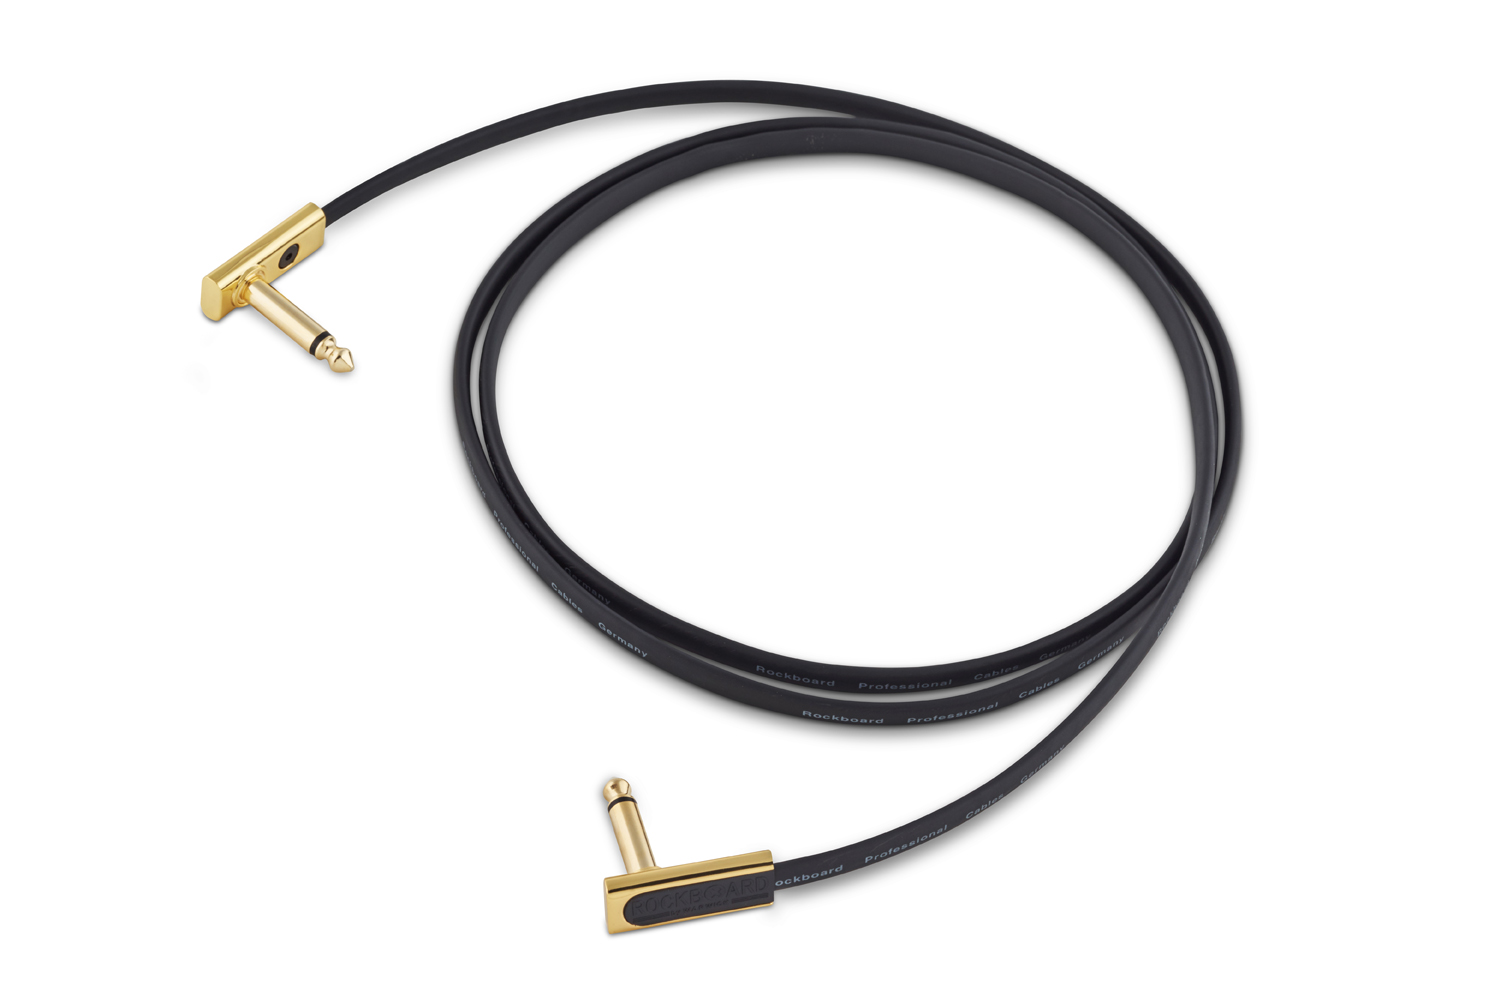 RockBoard Gold Series Flat Patch Cable - 140 cm / 55 1/8"